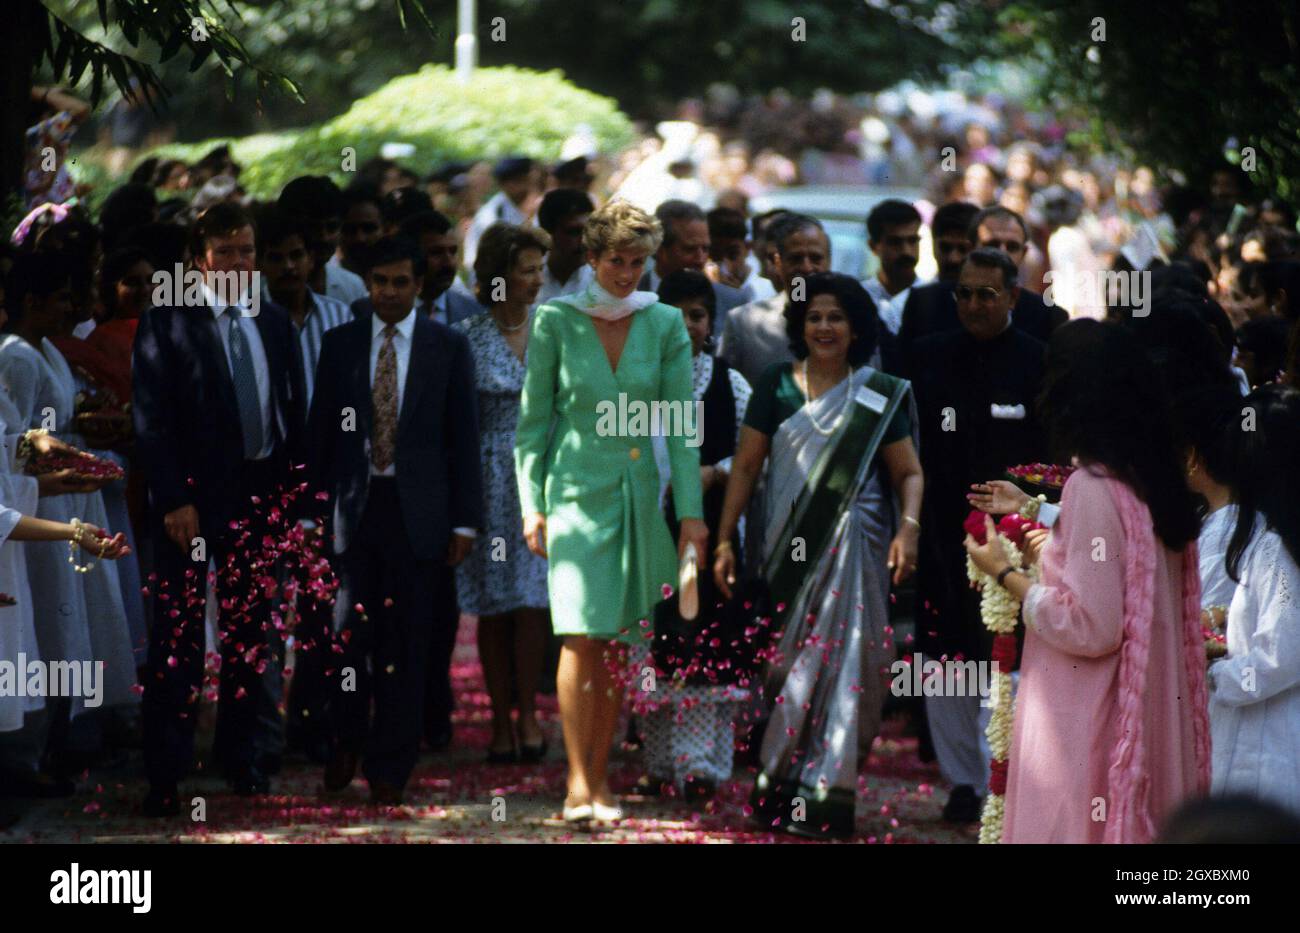 Diana, Princess of Wales smiles as she has petals thrown at her during her visit to Lahore, Pakistan in October 1991. Anwar Hussein/EMPICS Entertainment  Stock Photo